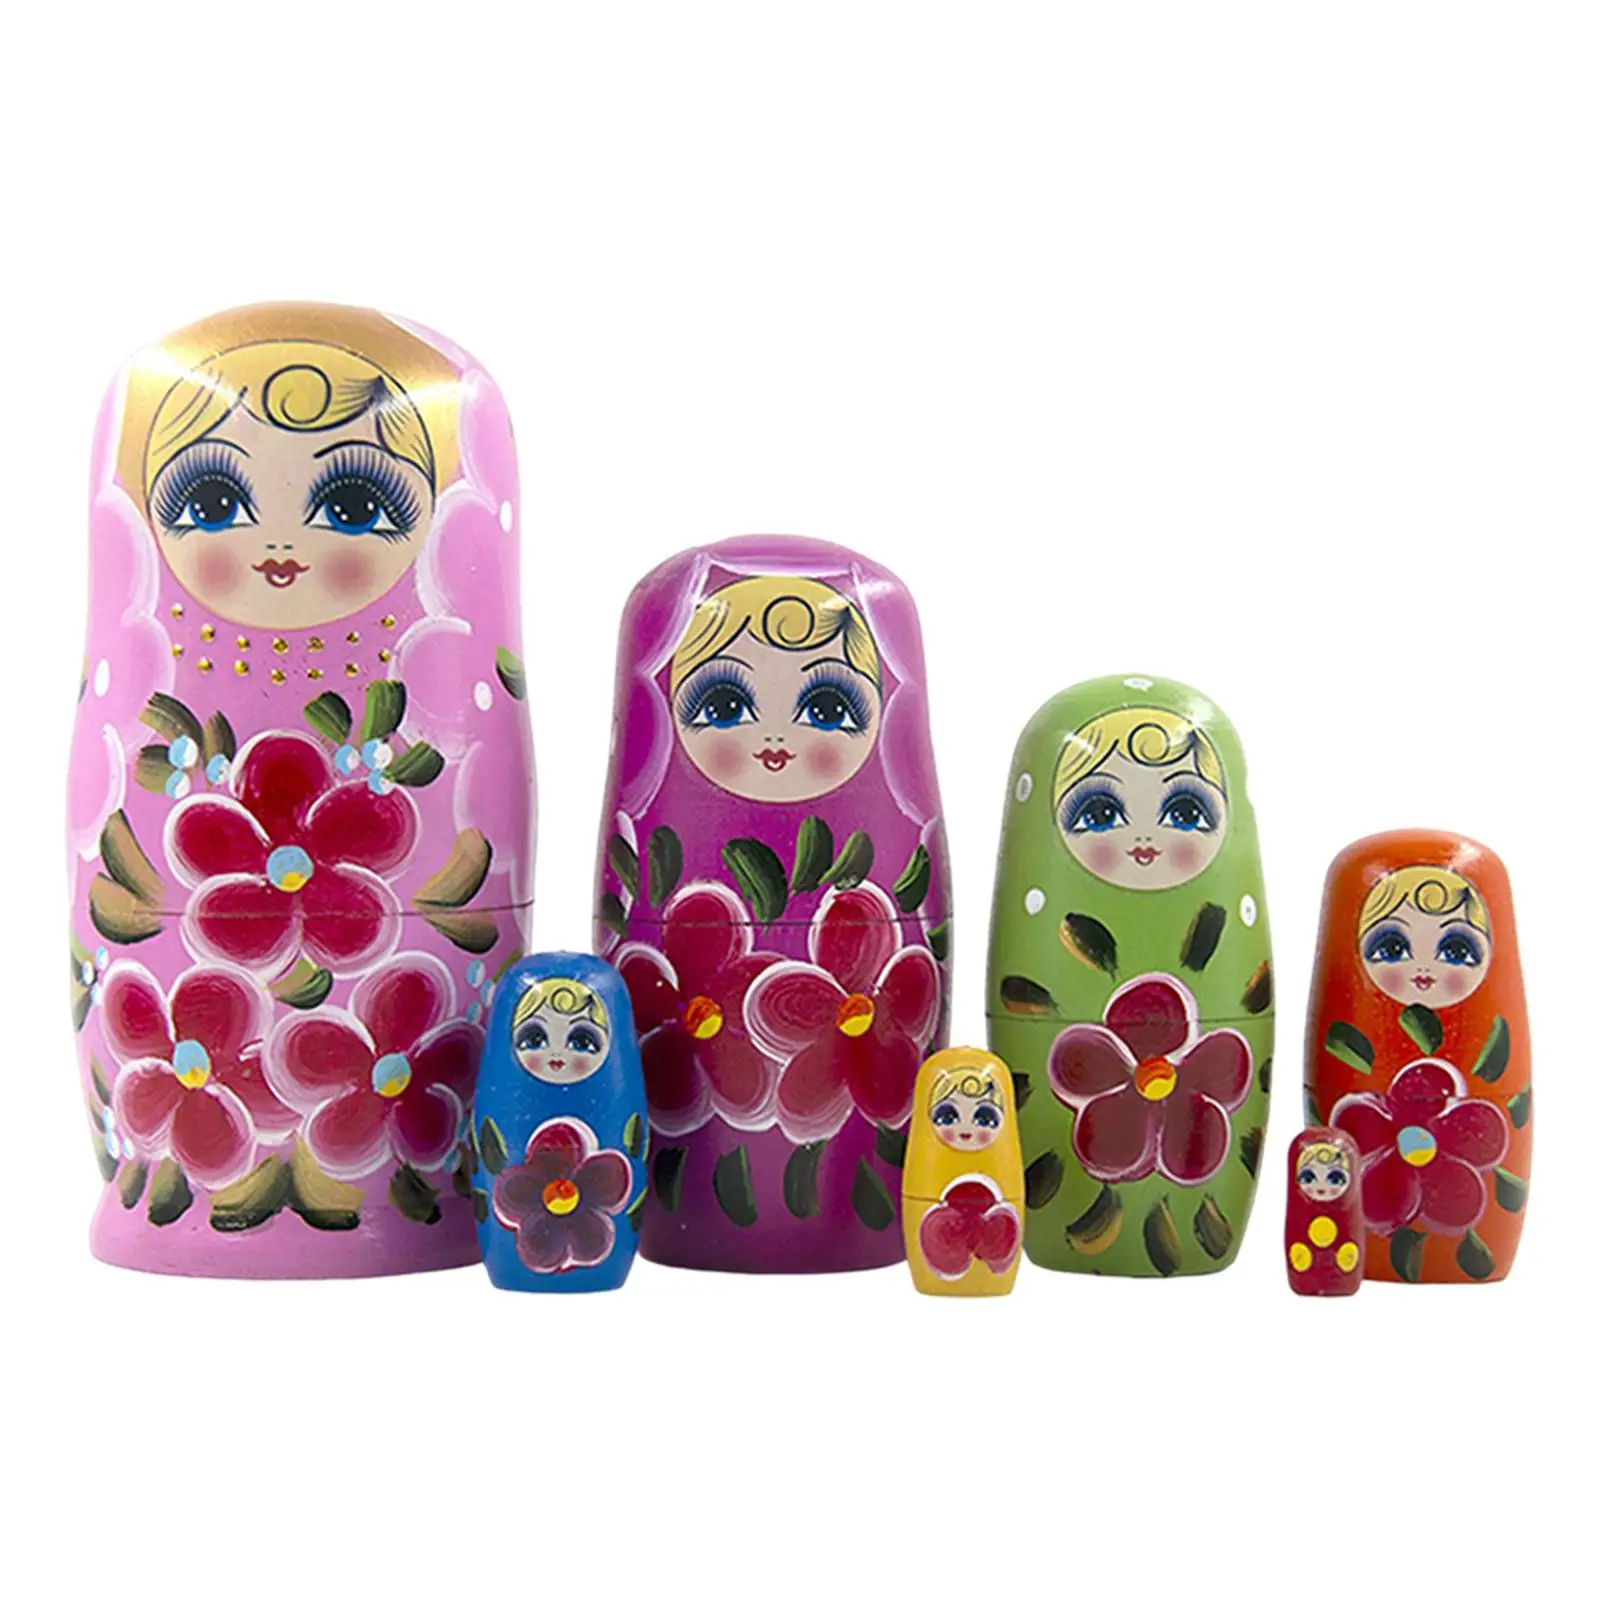 Lovely Wooden Girls Russian Nesting Dolls Kits 7 Count Handmade Child Room Decoration Housewarming Gifts Popular Colorful